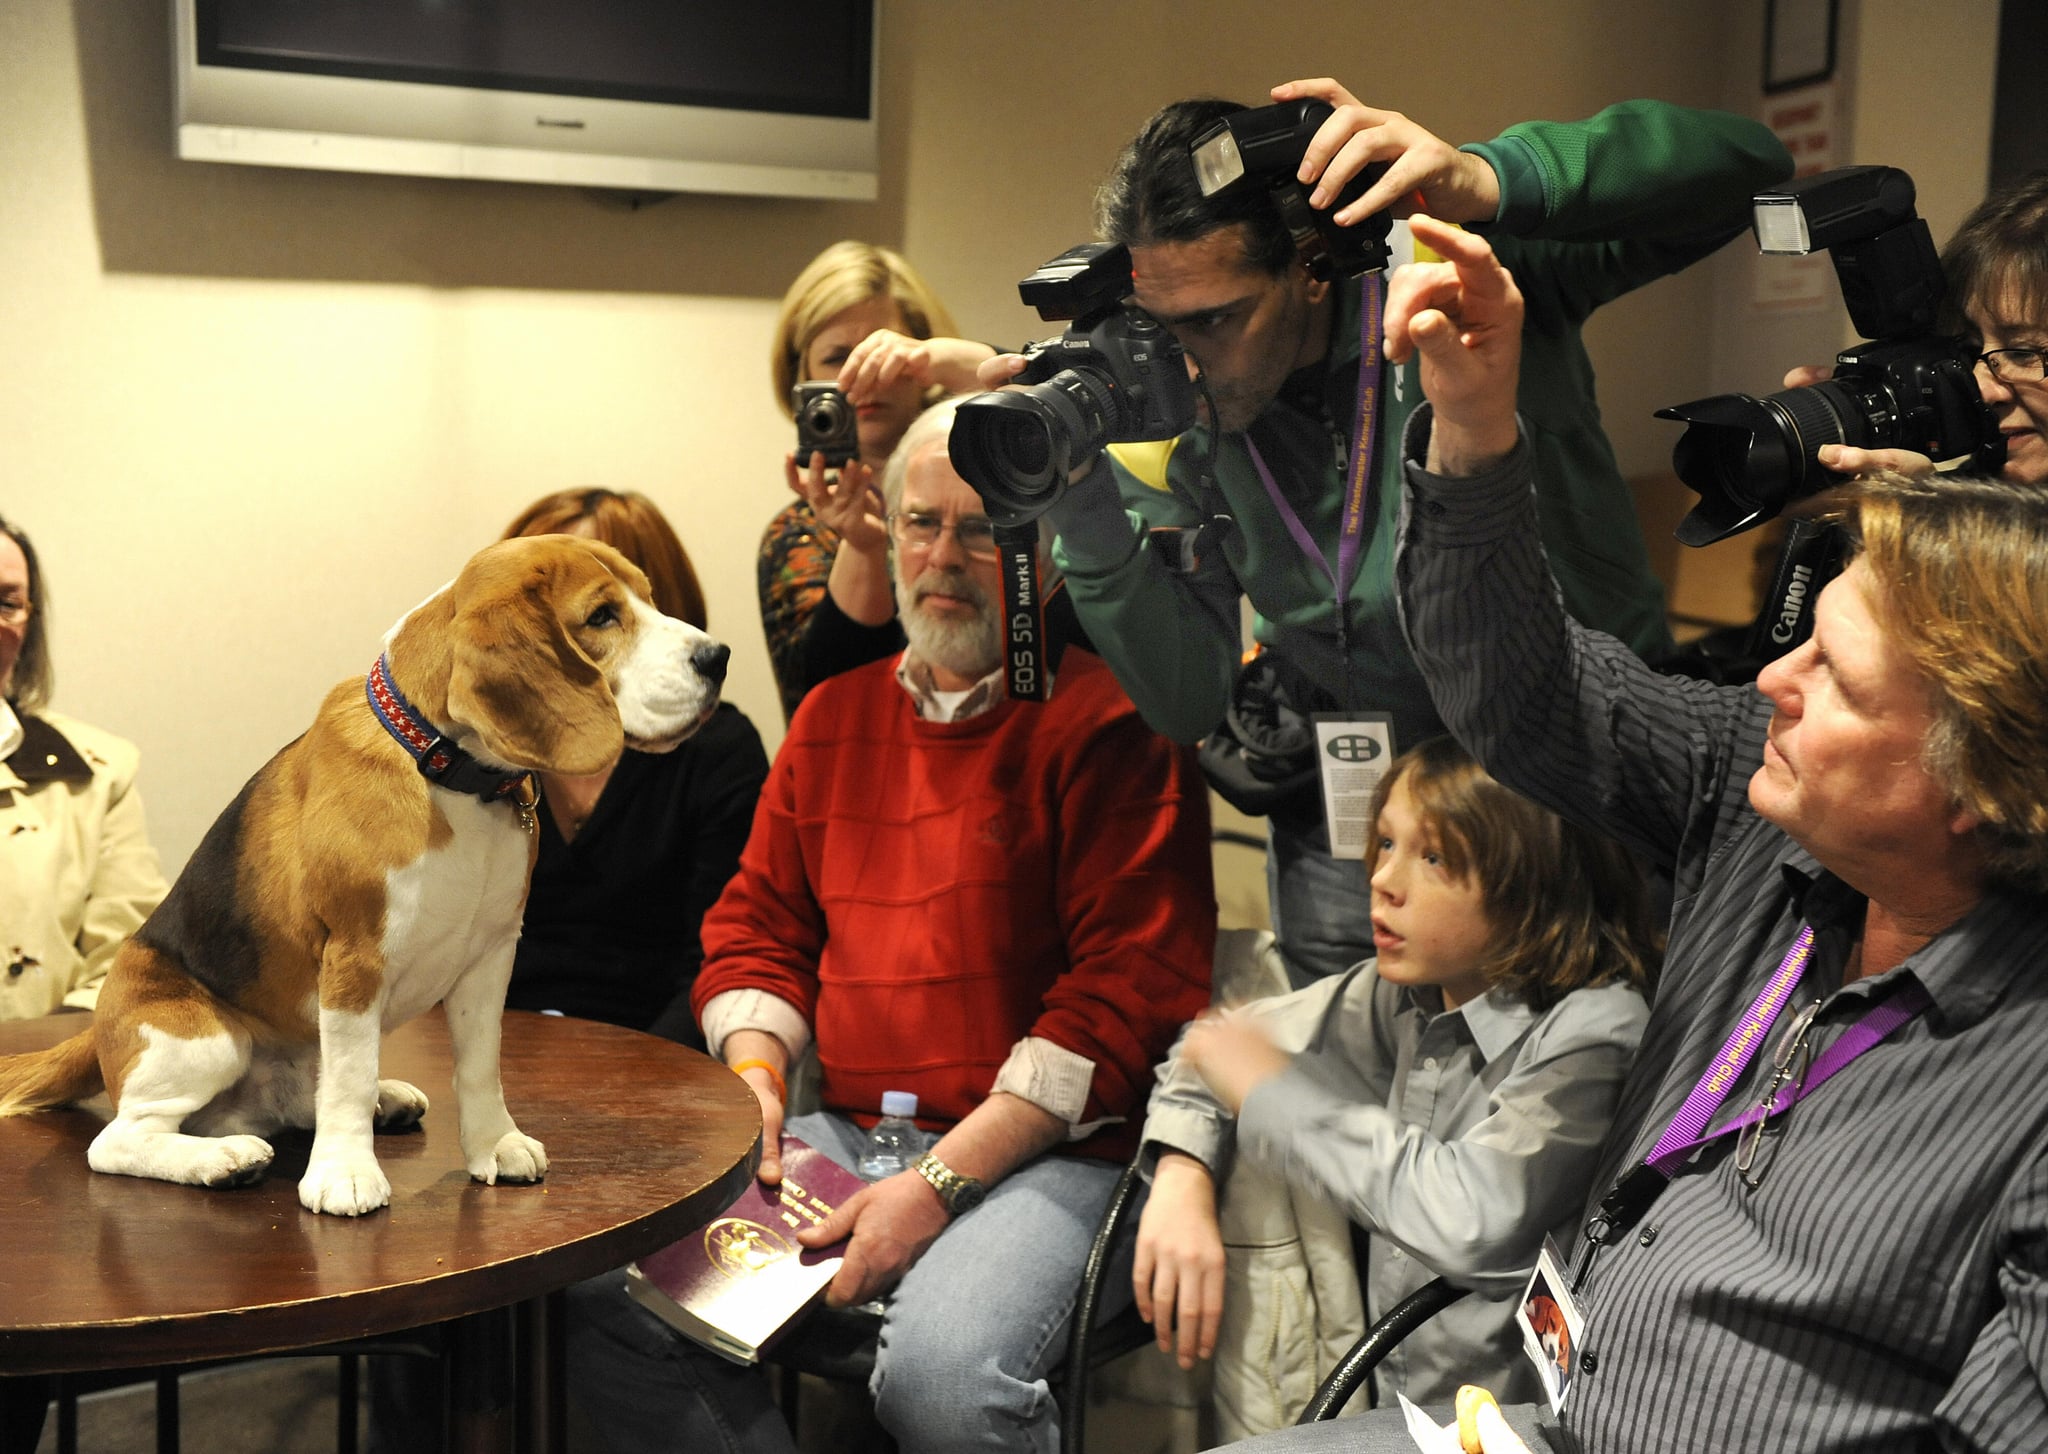 Cute Dogs From Behind-the-Scenes at the 2009 Westminster Kennel Club Dog Show ...2048 x 1454